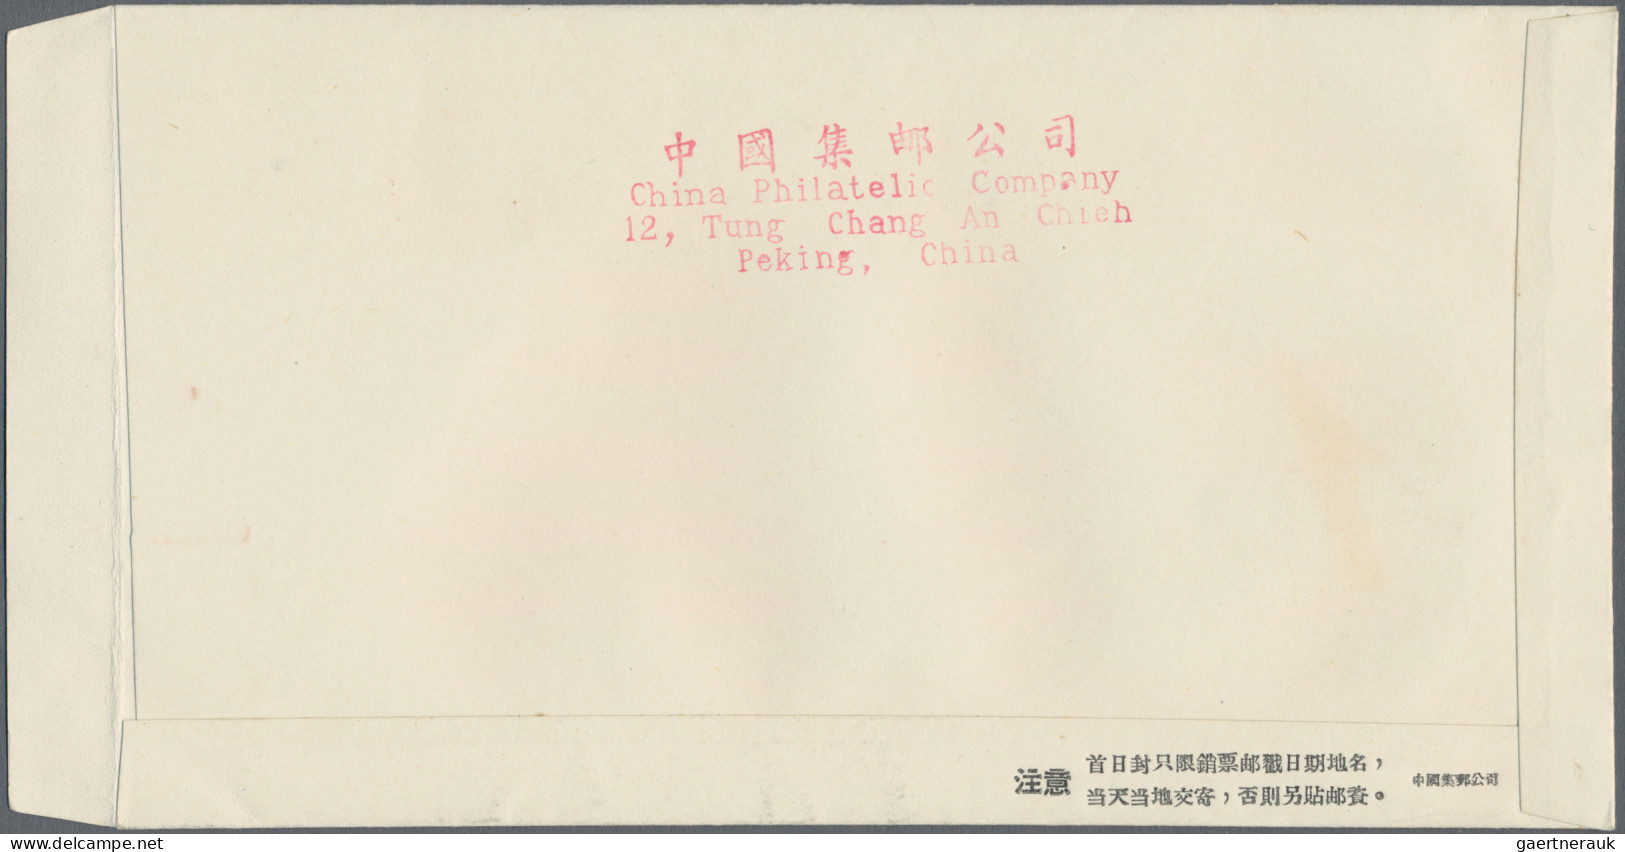 China (PRC): 1959/63, three commemorative sets on official FDCs, including 1st N